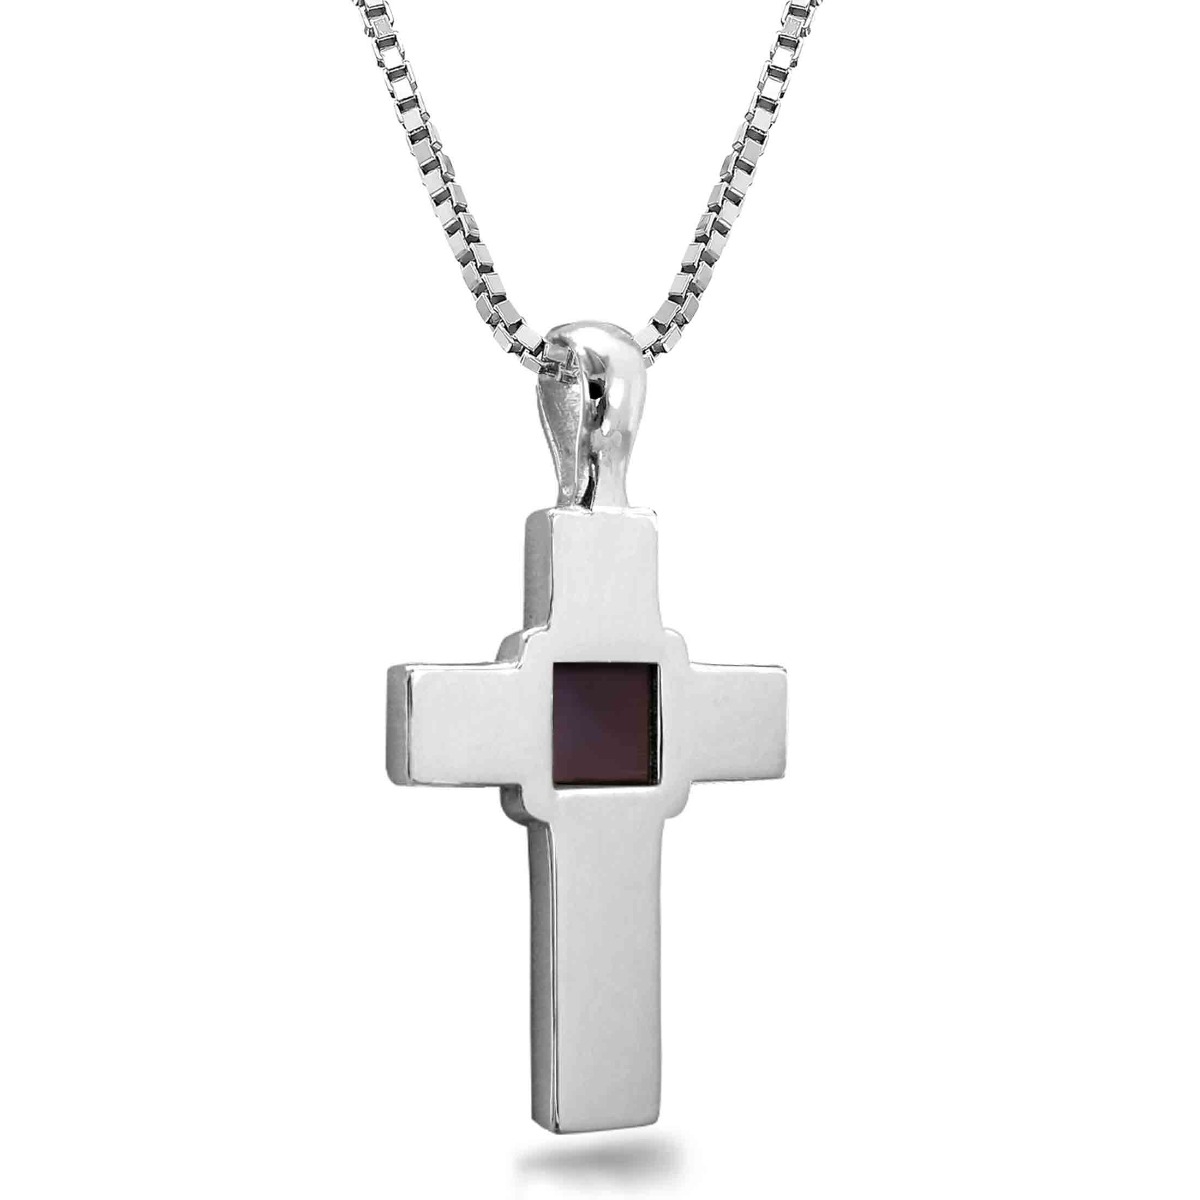 Nano Latin Cross Pendant with Bible Microchip - Silver or Gold - 1